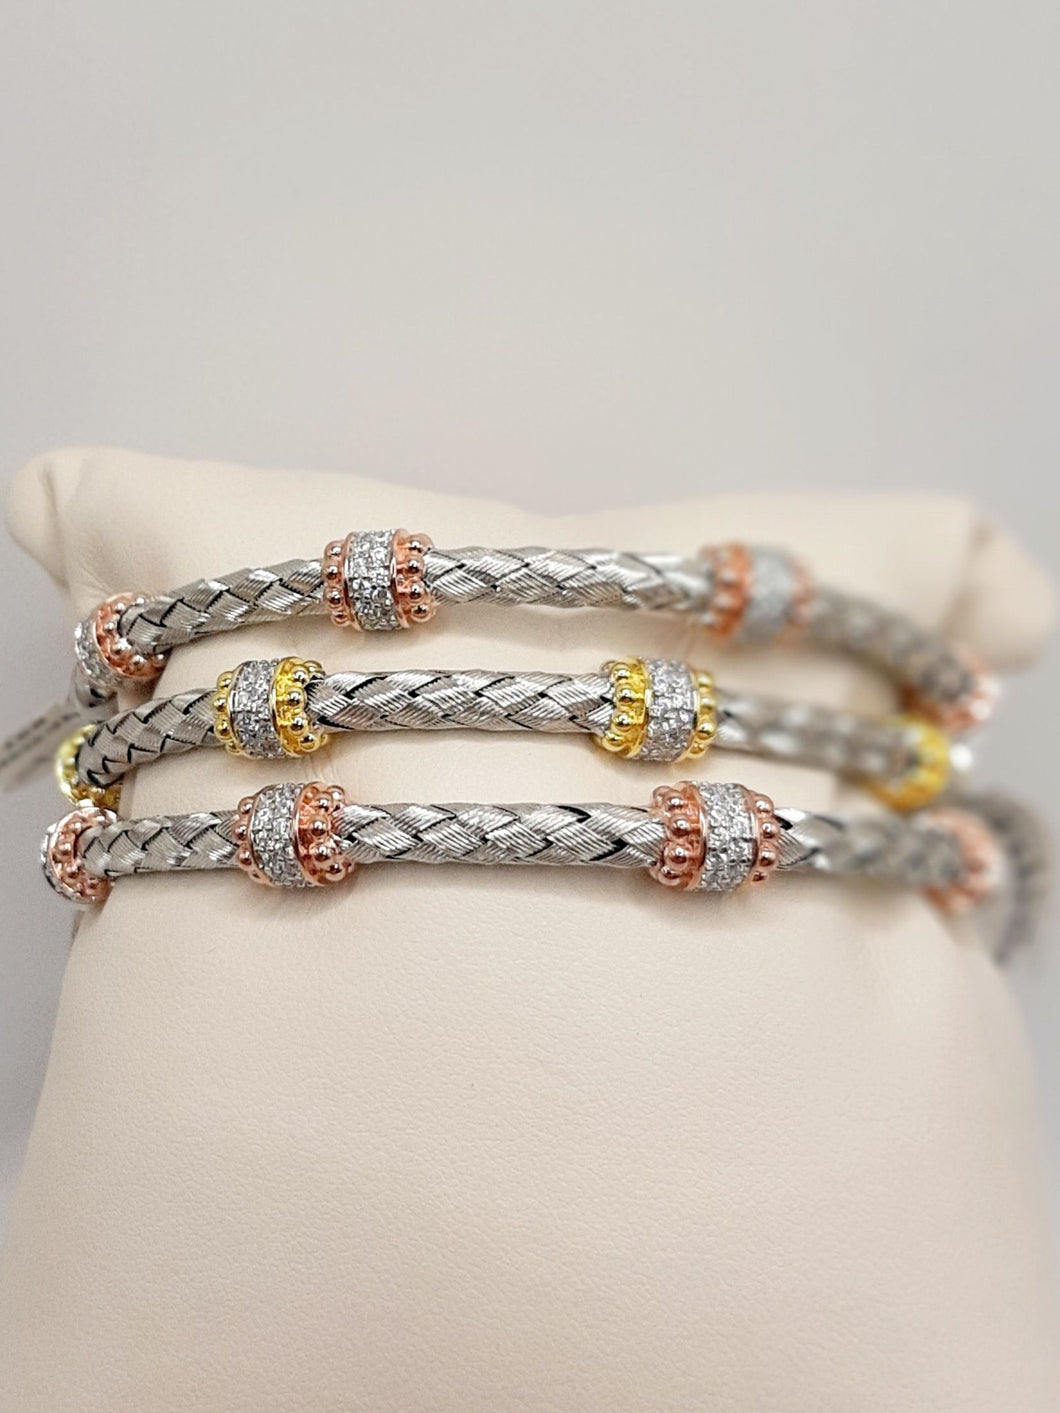 Sterling Silver and Yellow Gold and Rose Gold Plate Cable Cuff bracelets Featuring Cubic Zirconium's